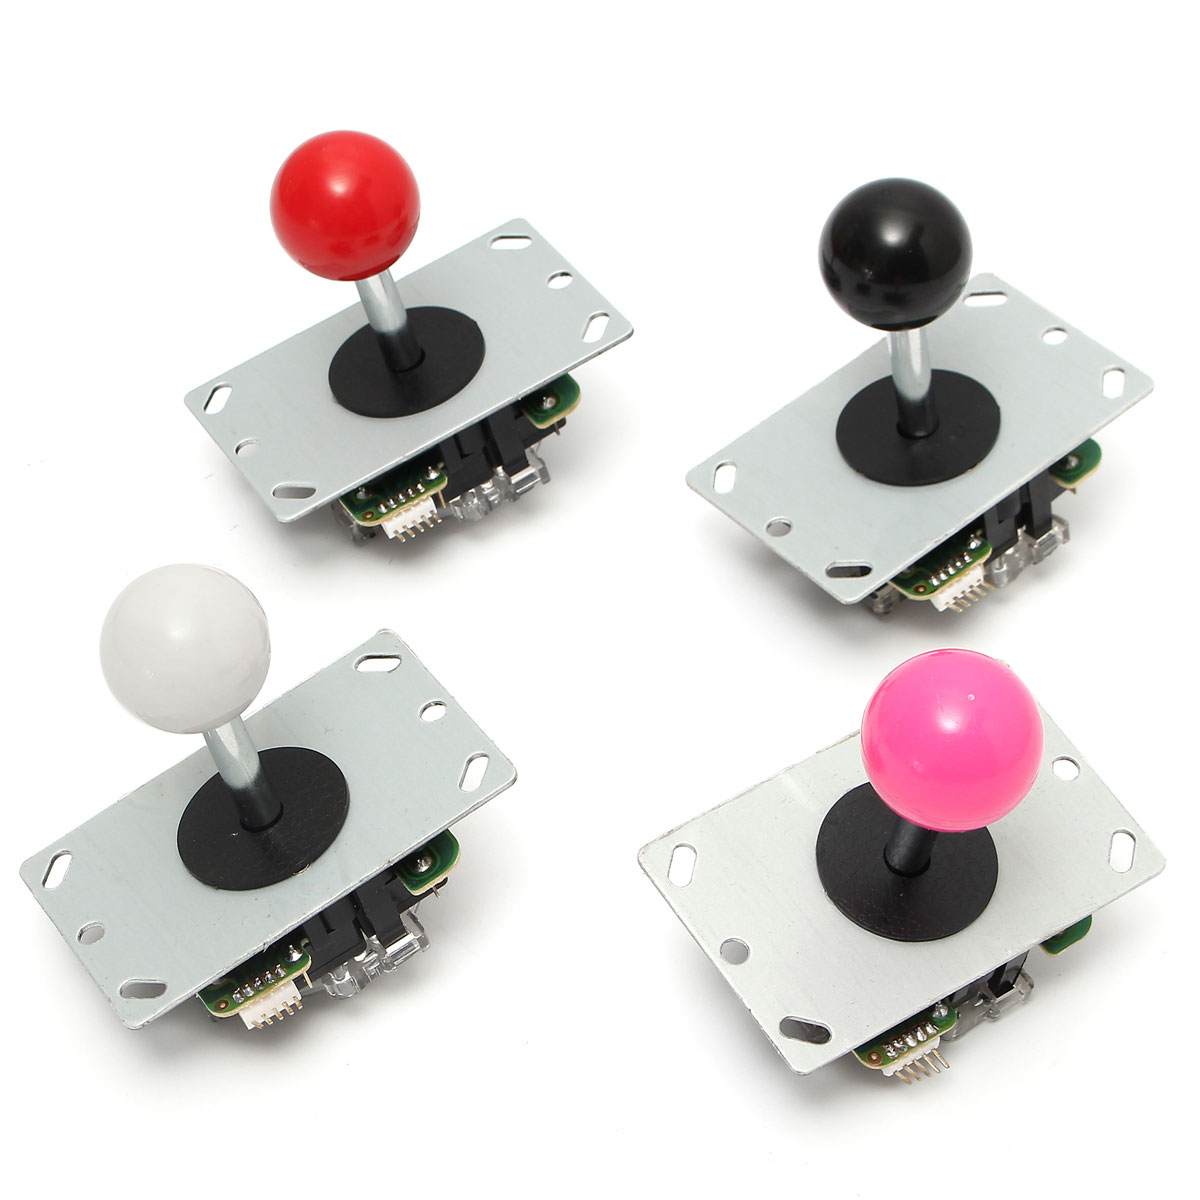 Game DIY Arcade Set Kits Replacement Parts USB Encoder to PC Joystick and Buttons 10